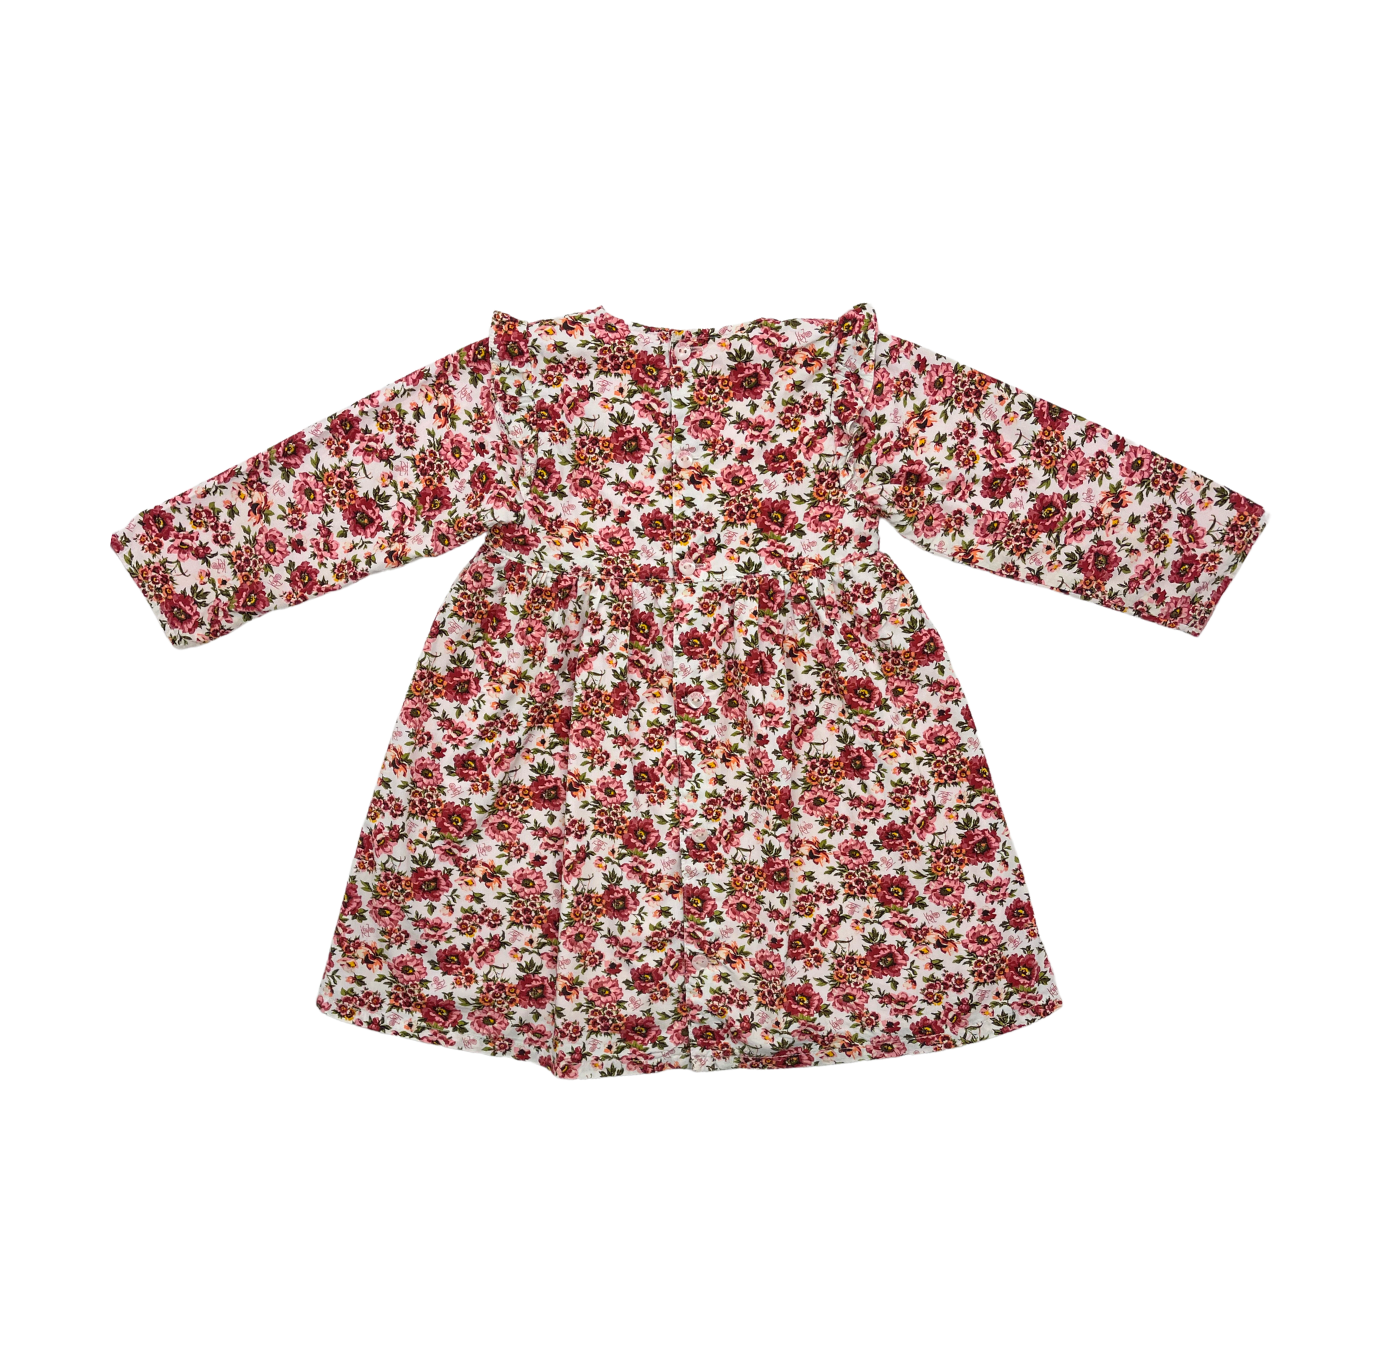 KENZO - Floral dress - 2 years old